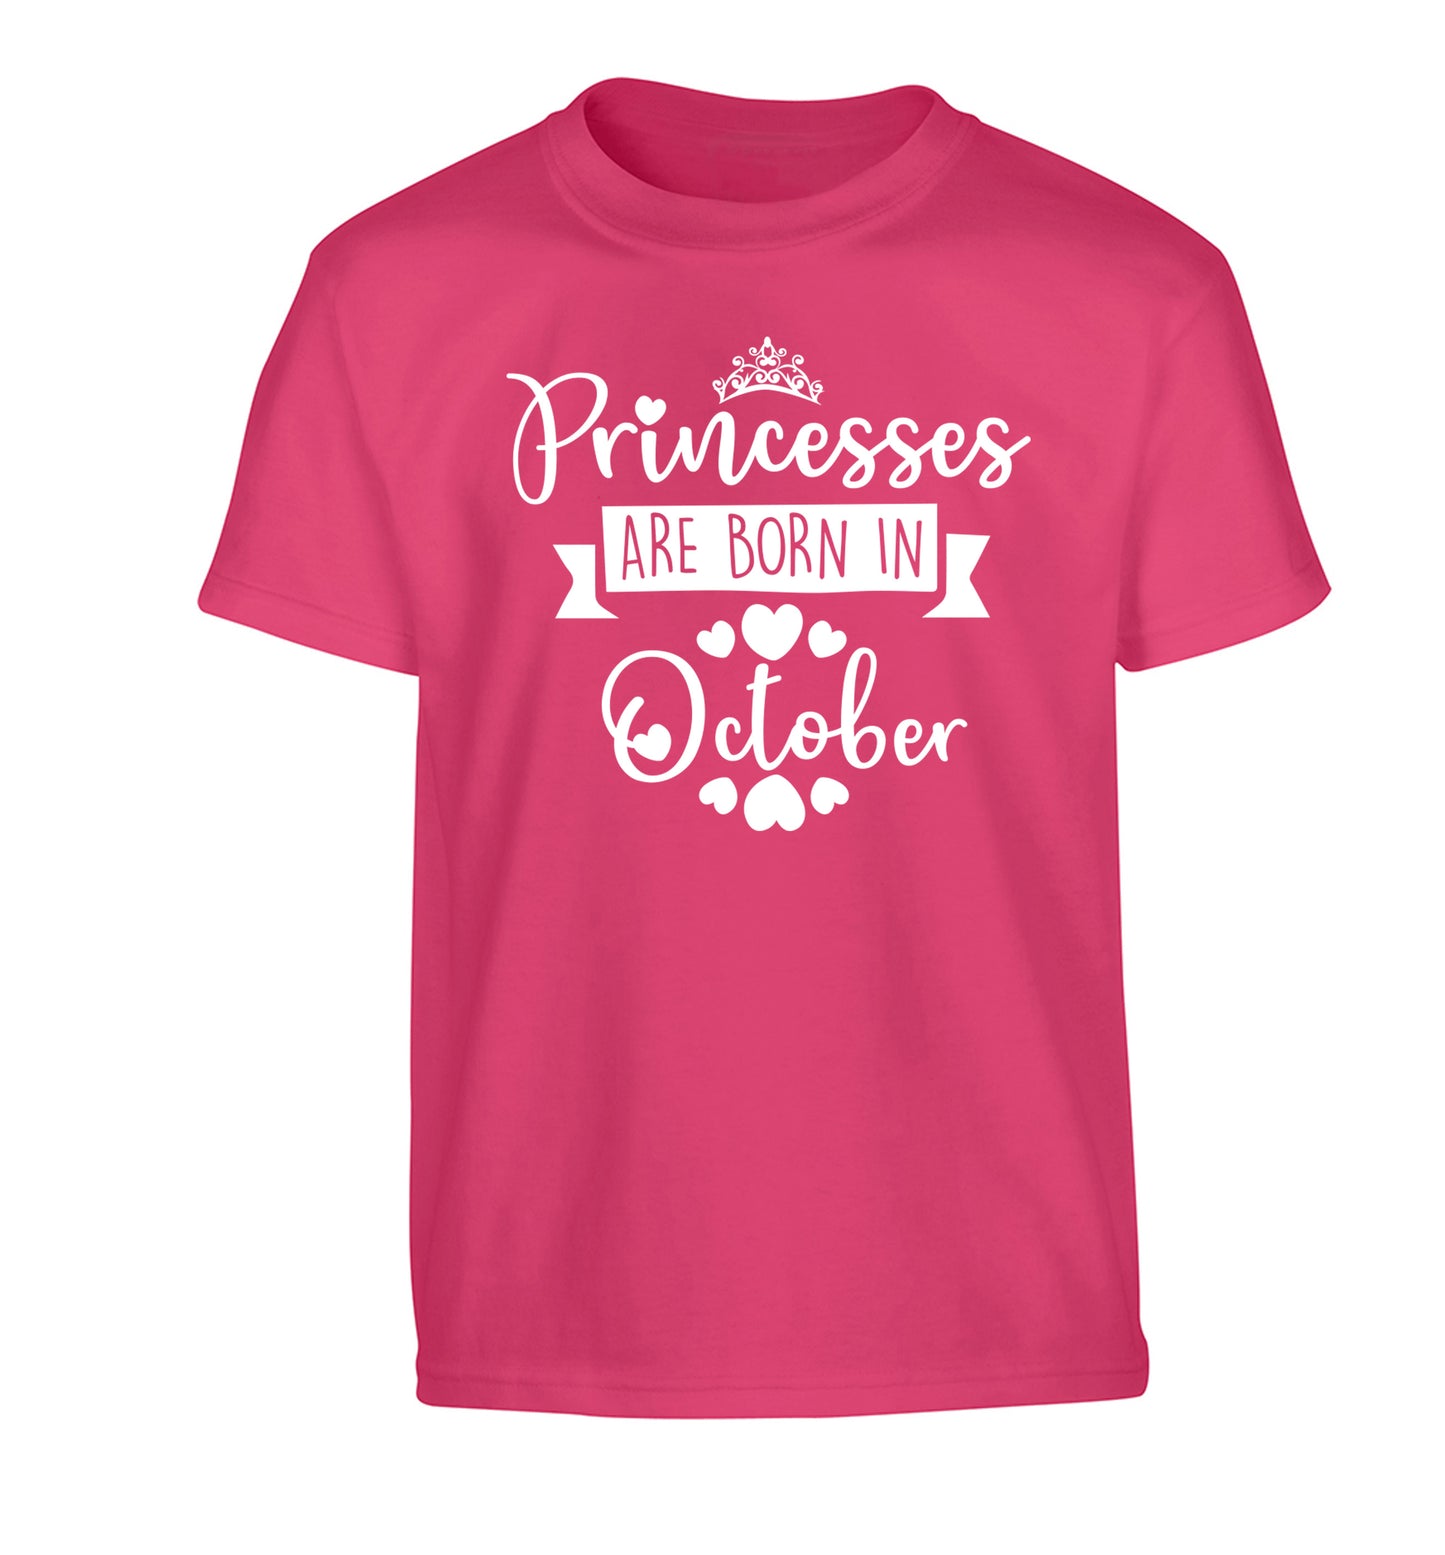 Princesses are born in October Children's pink Tshirt 12-13 Years